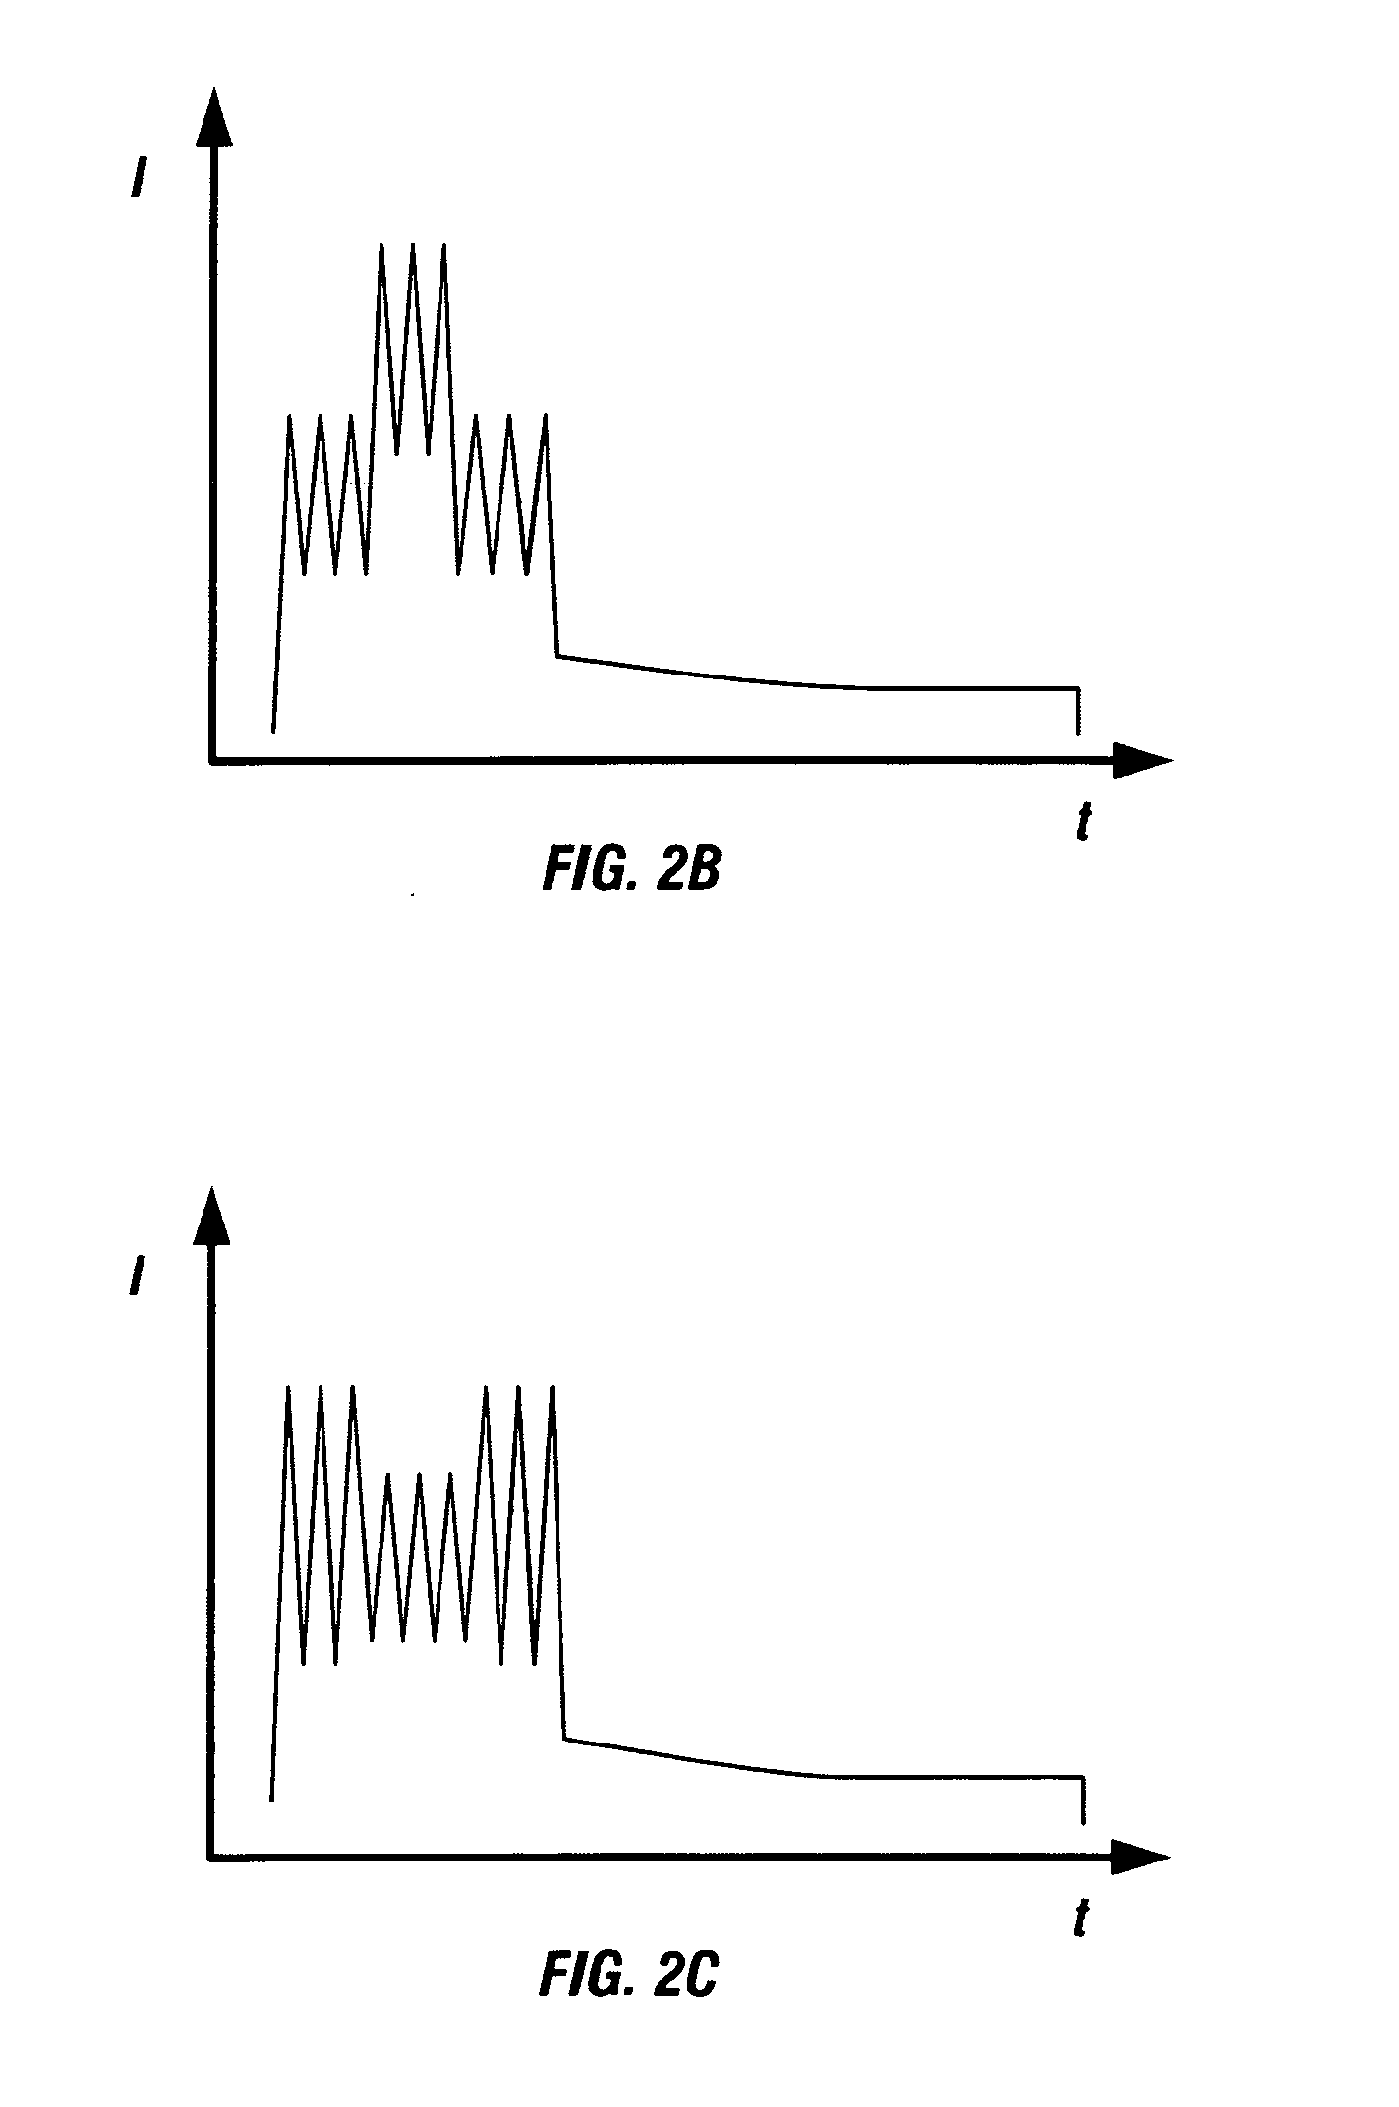 Apparatus and Methods for Optical Emission Spectroscopy